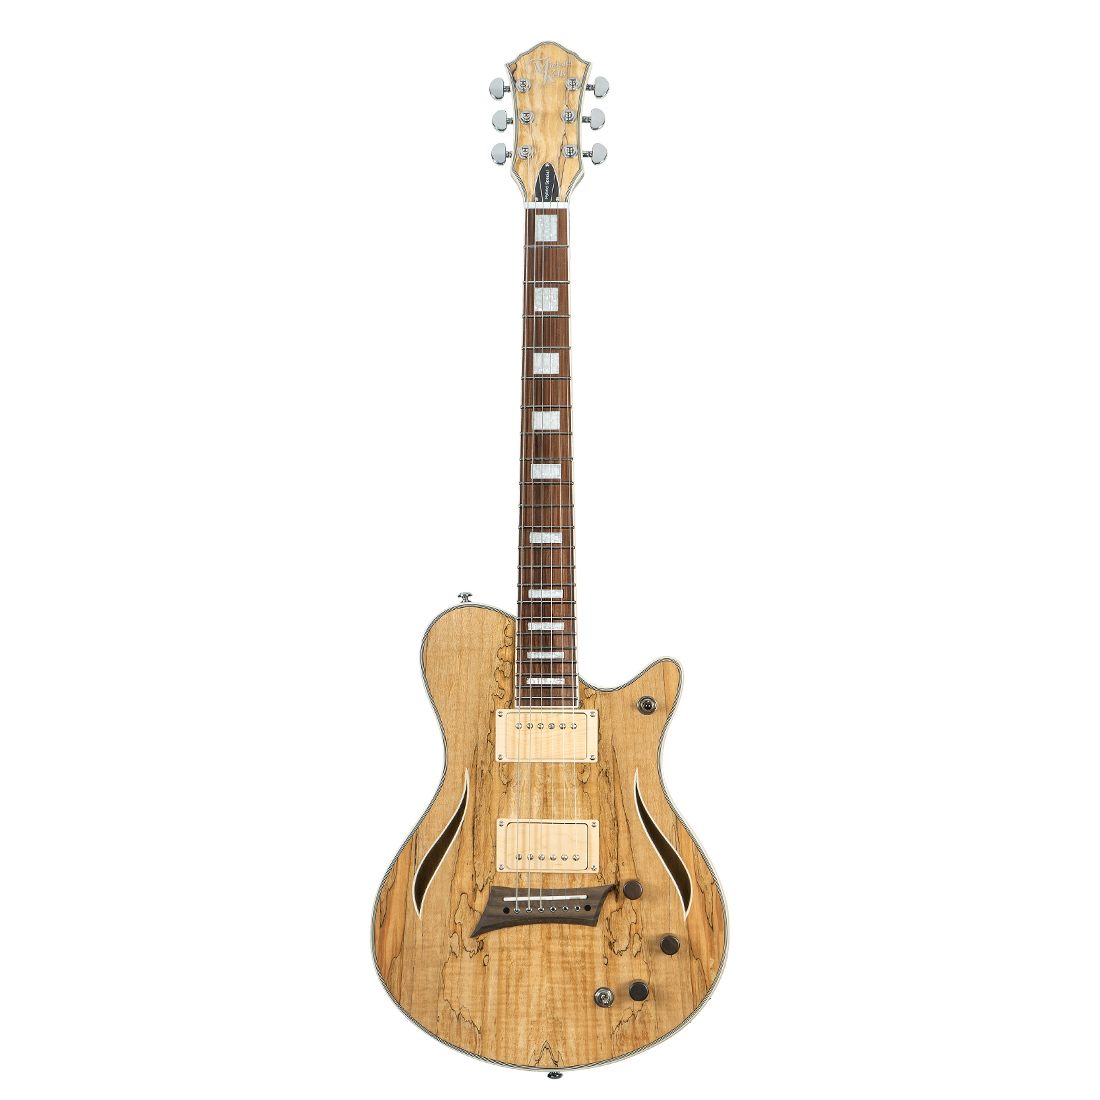 Michael Kelly MKHSSSPPYZ Hybrid Special Electric Guitar Spalted Mapl